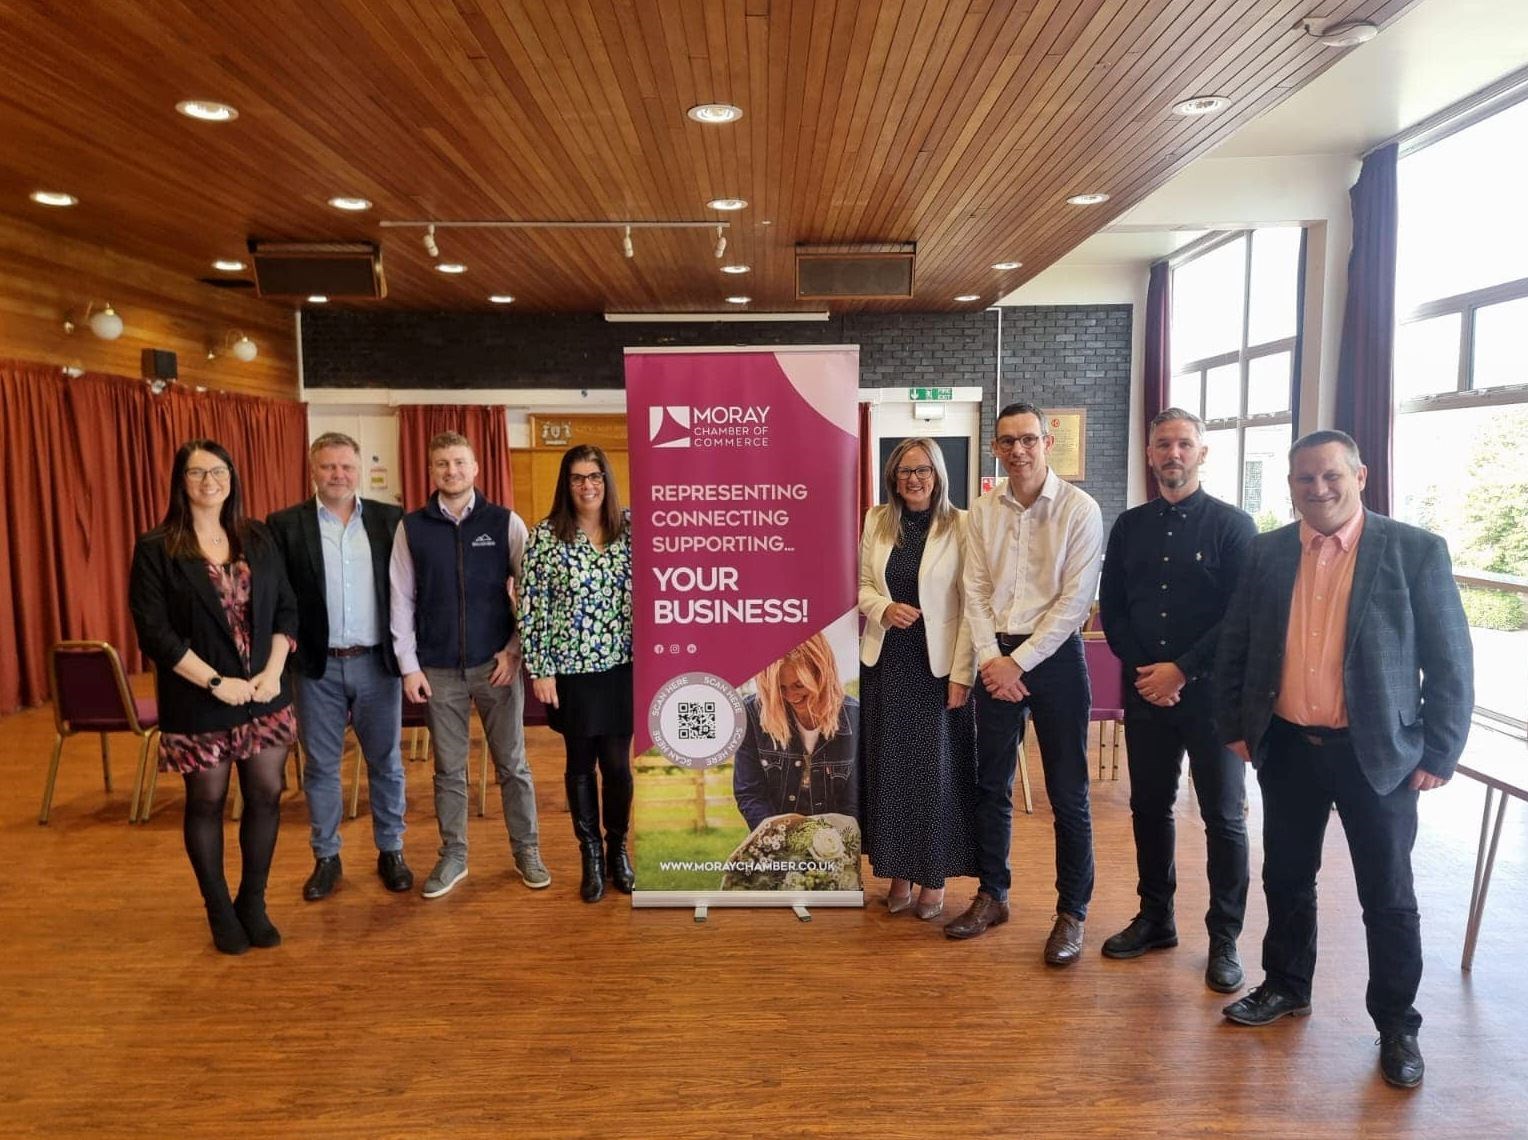 The event took place across three days in Moray. Attendees are pictured here at Elgin Town Hall.